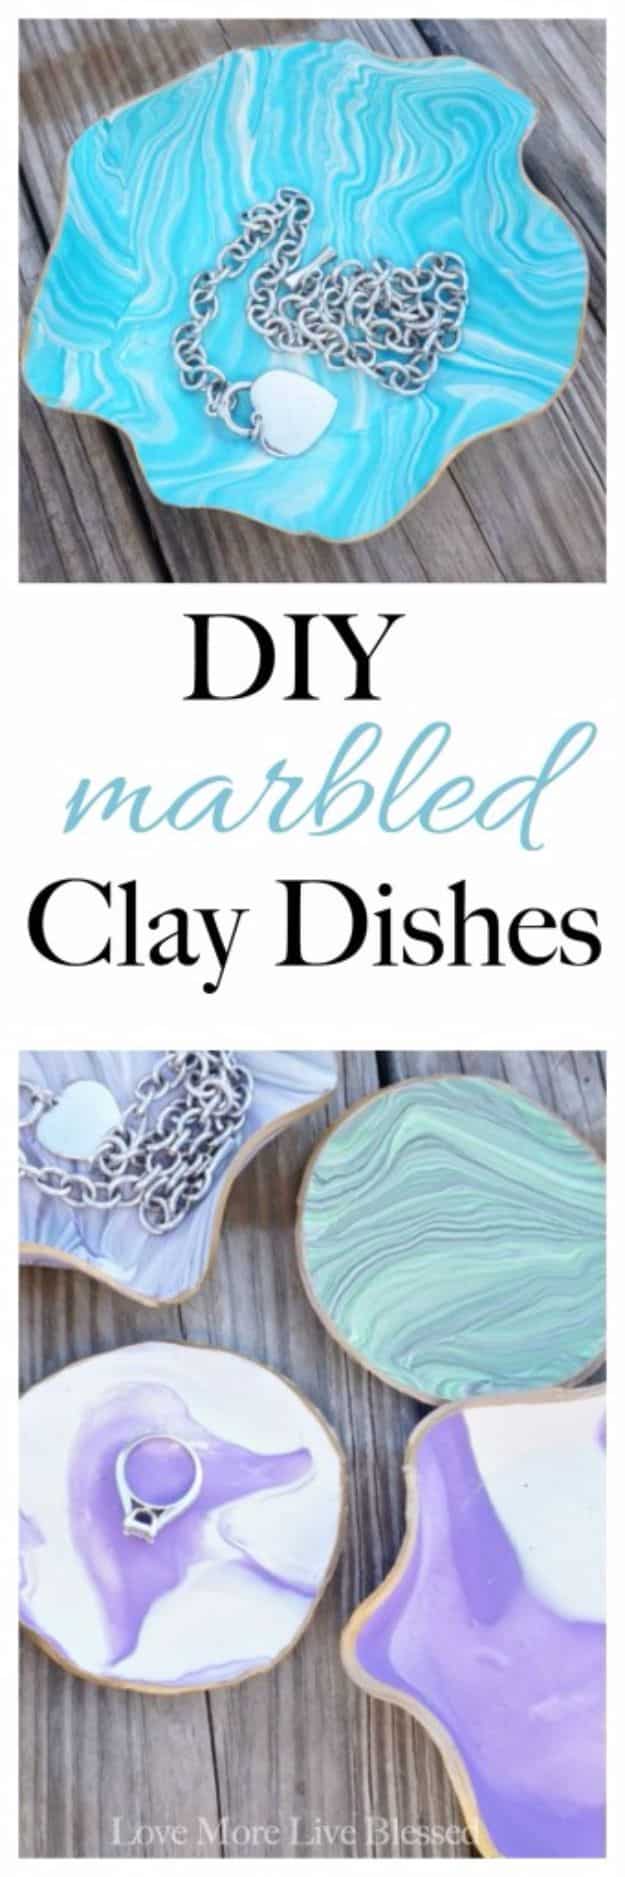 DIY Valentines Day Gifts for Her - DIY Marbled Clay Dishes - Cool and Easy Things To Make for Your Wife, Girlfriend, Fiance - Creative and Cheap Do It Yourself Projects to Give Your Girl - Ladies Love These Ideas for Bath, Yard, Home and Kitchen, Outdoors - Make, Don't Buy Your Valentine 